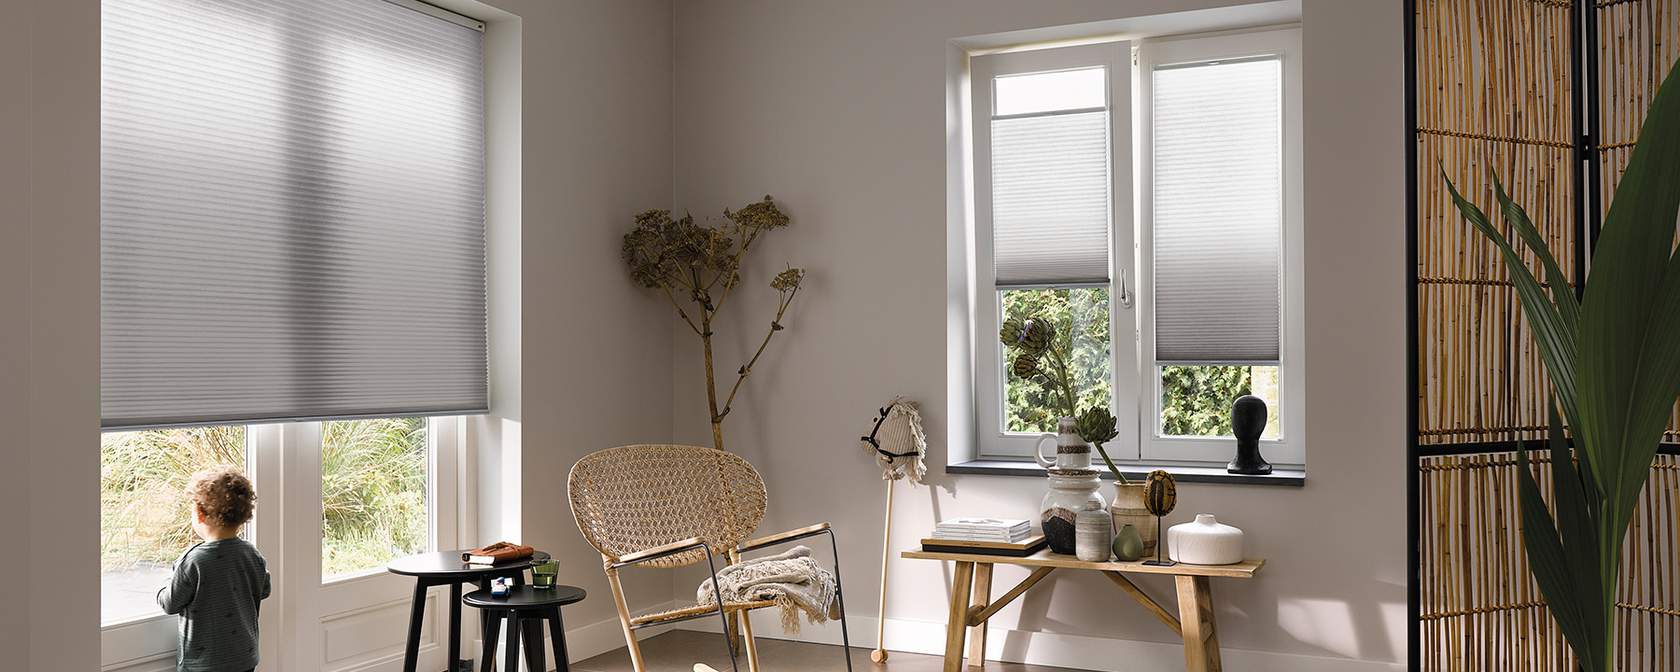 Best Blinds For French Doors